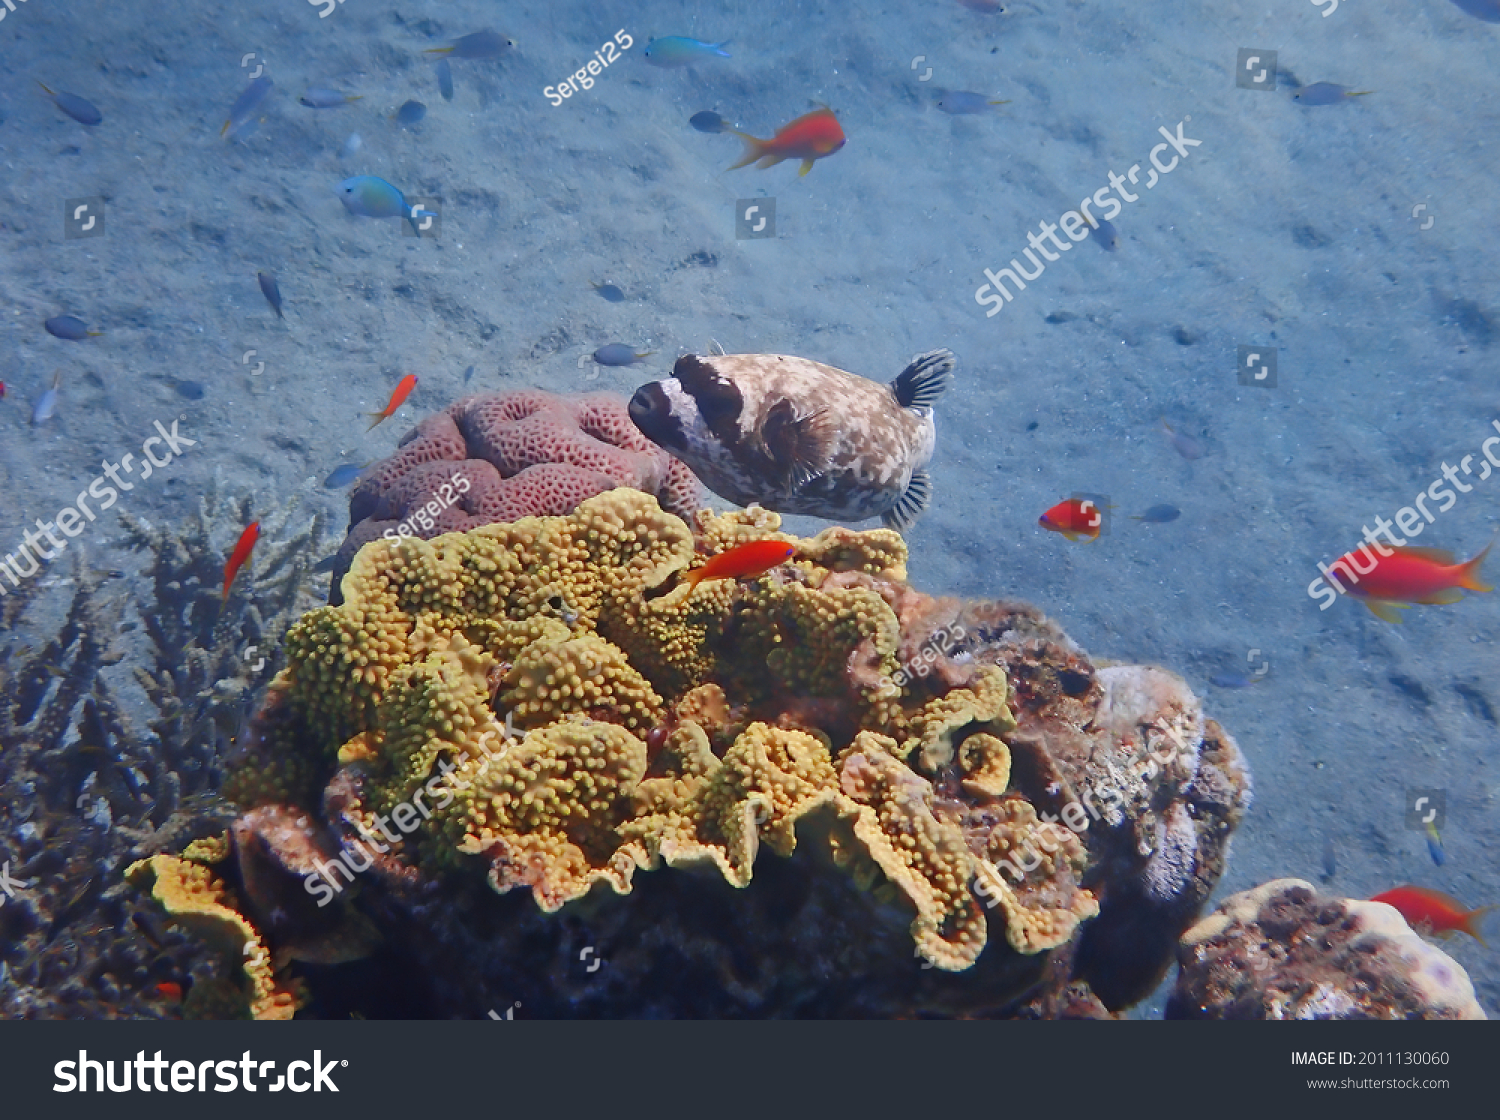 Masked puffer fish, scientific name is Arothron diadematus, it belongs to the family Tetraodontidae, it inhabits coral reefs  of the Red Sea, Middle East #2011130060